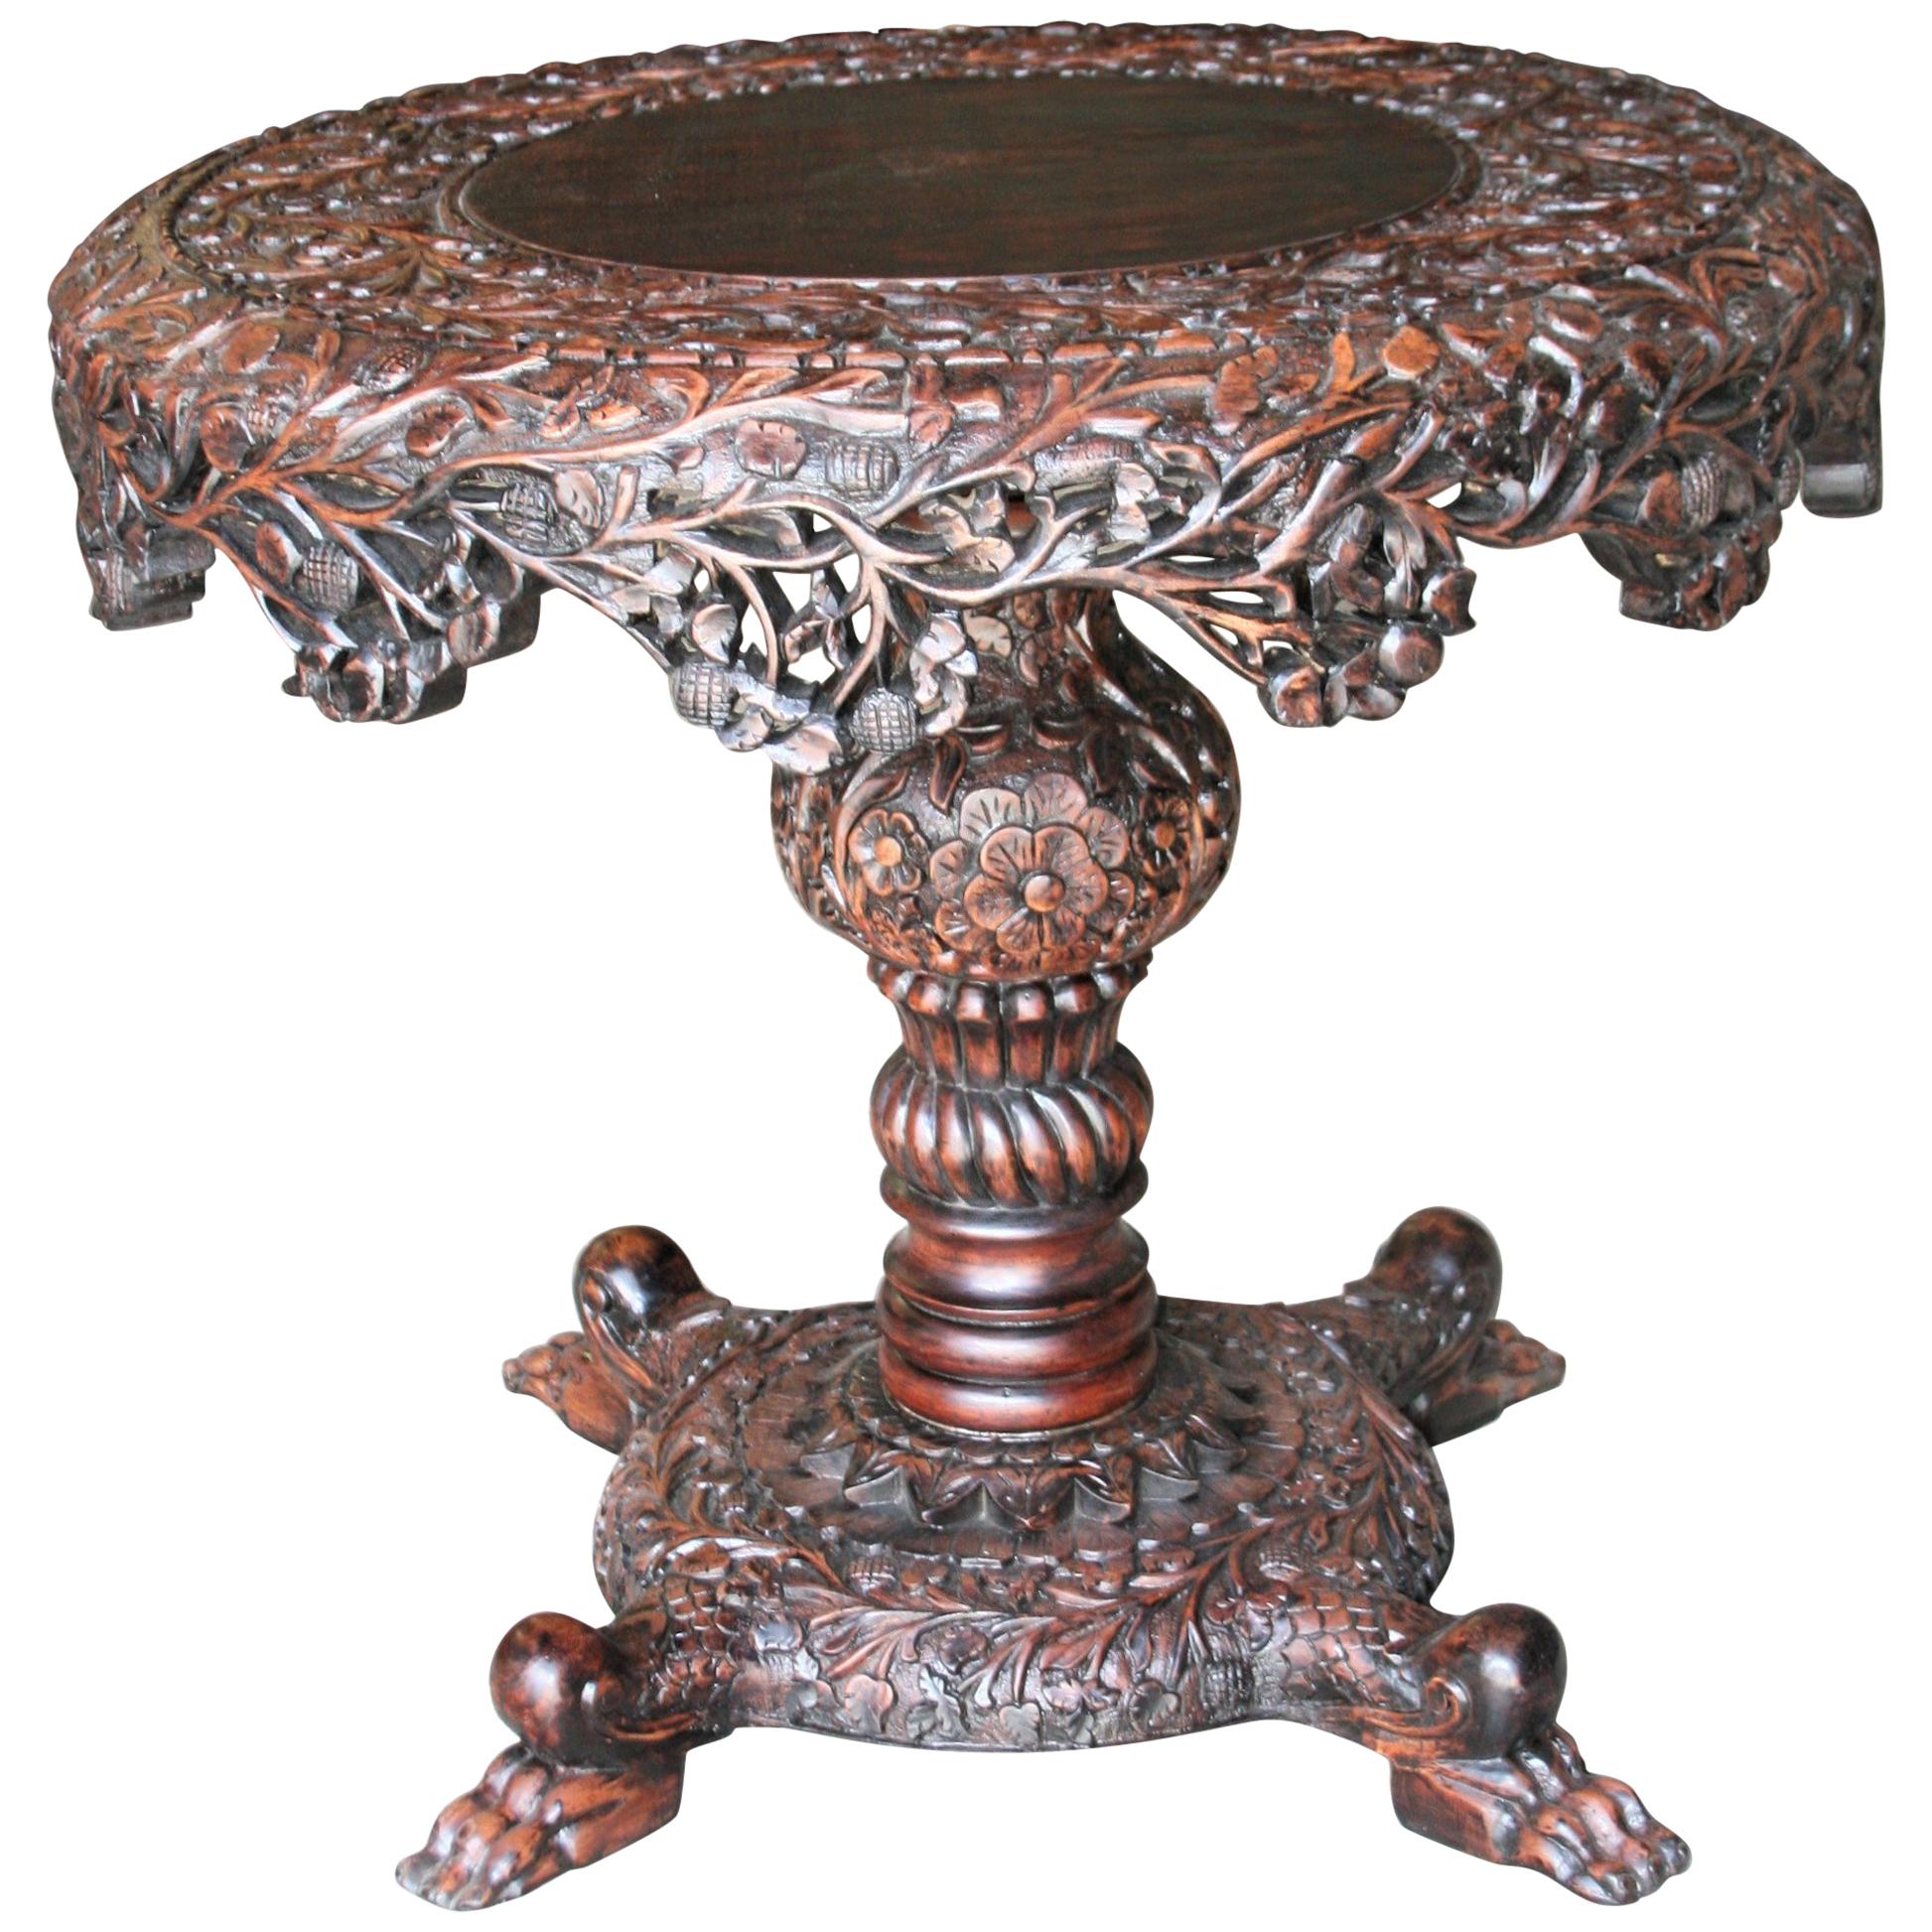 Exquisitely Carved Solid Teak Wood Round Center Table from a Colonial Mansion For Sale